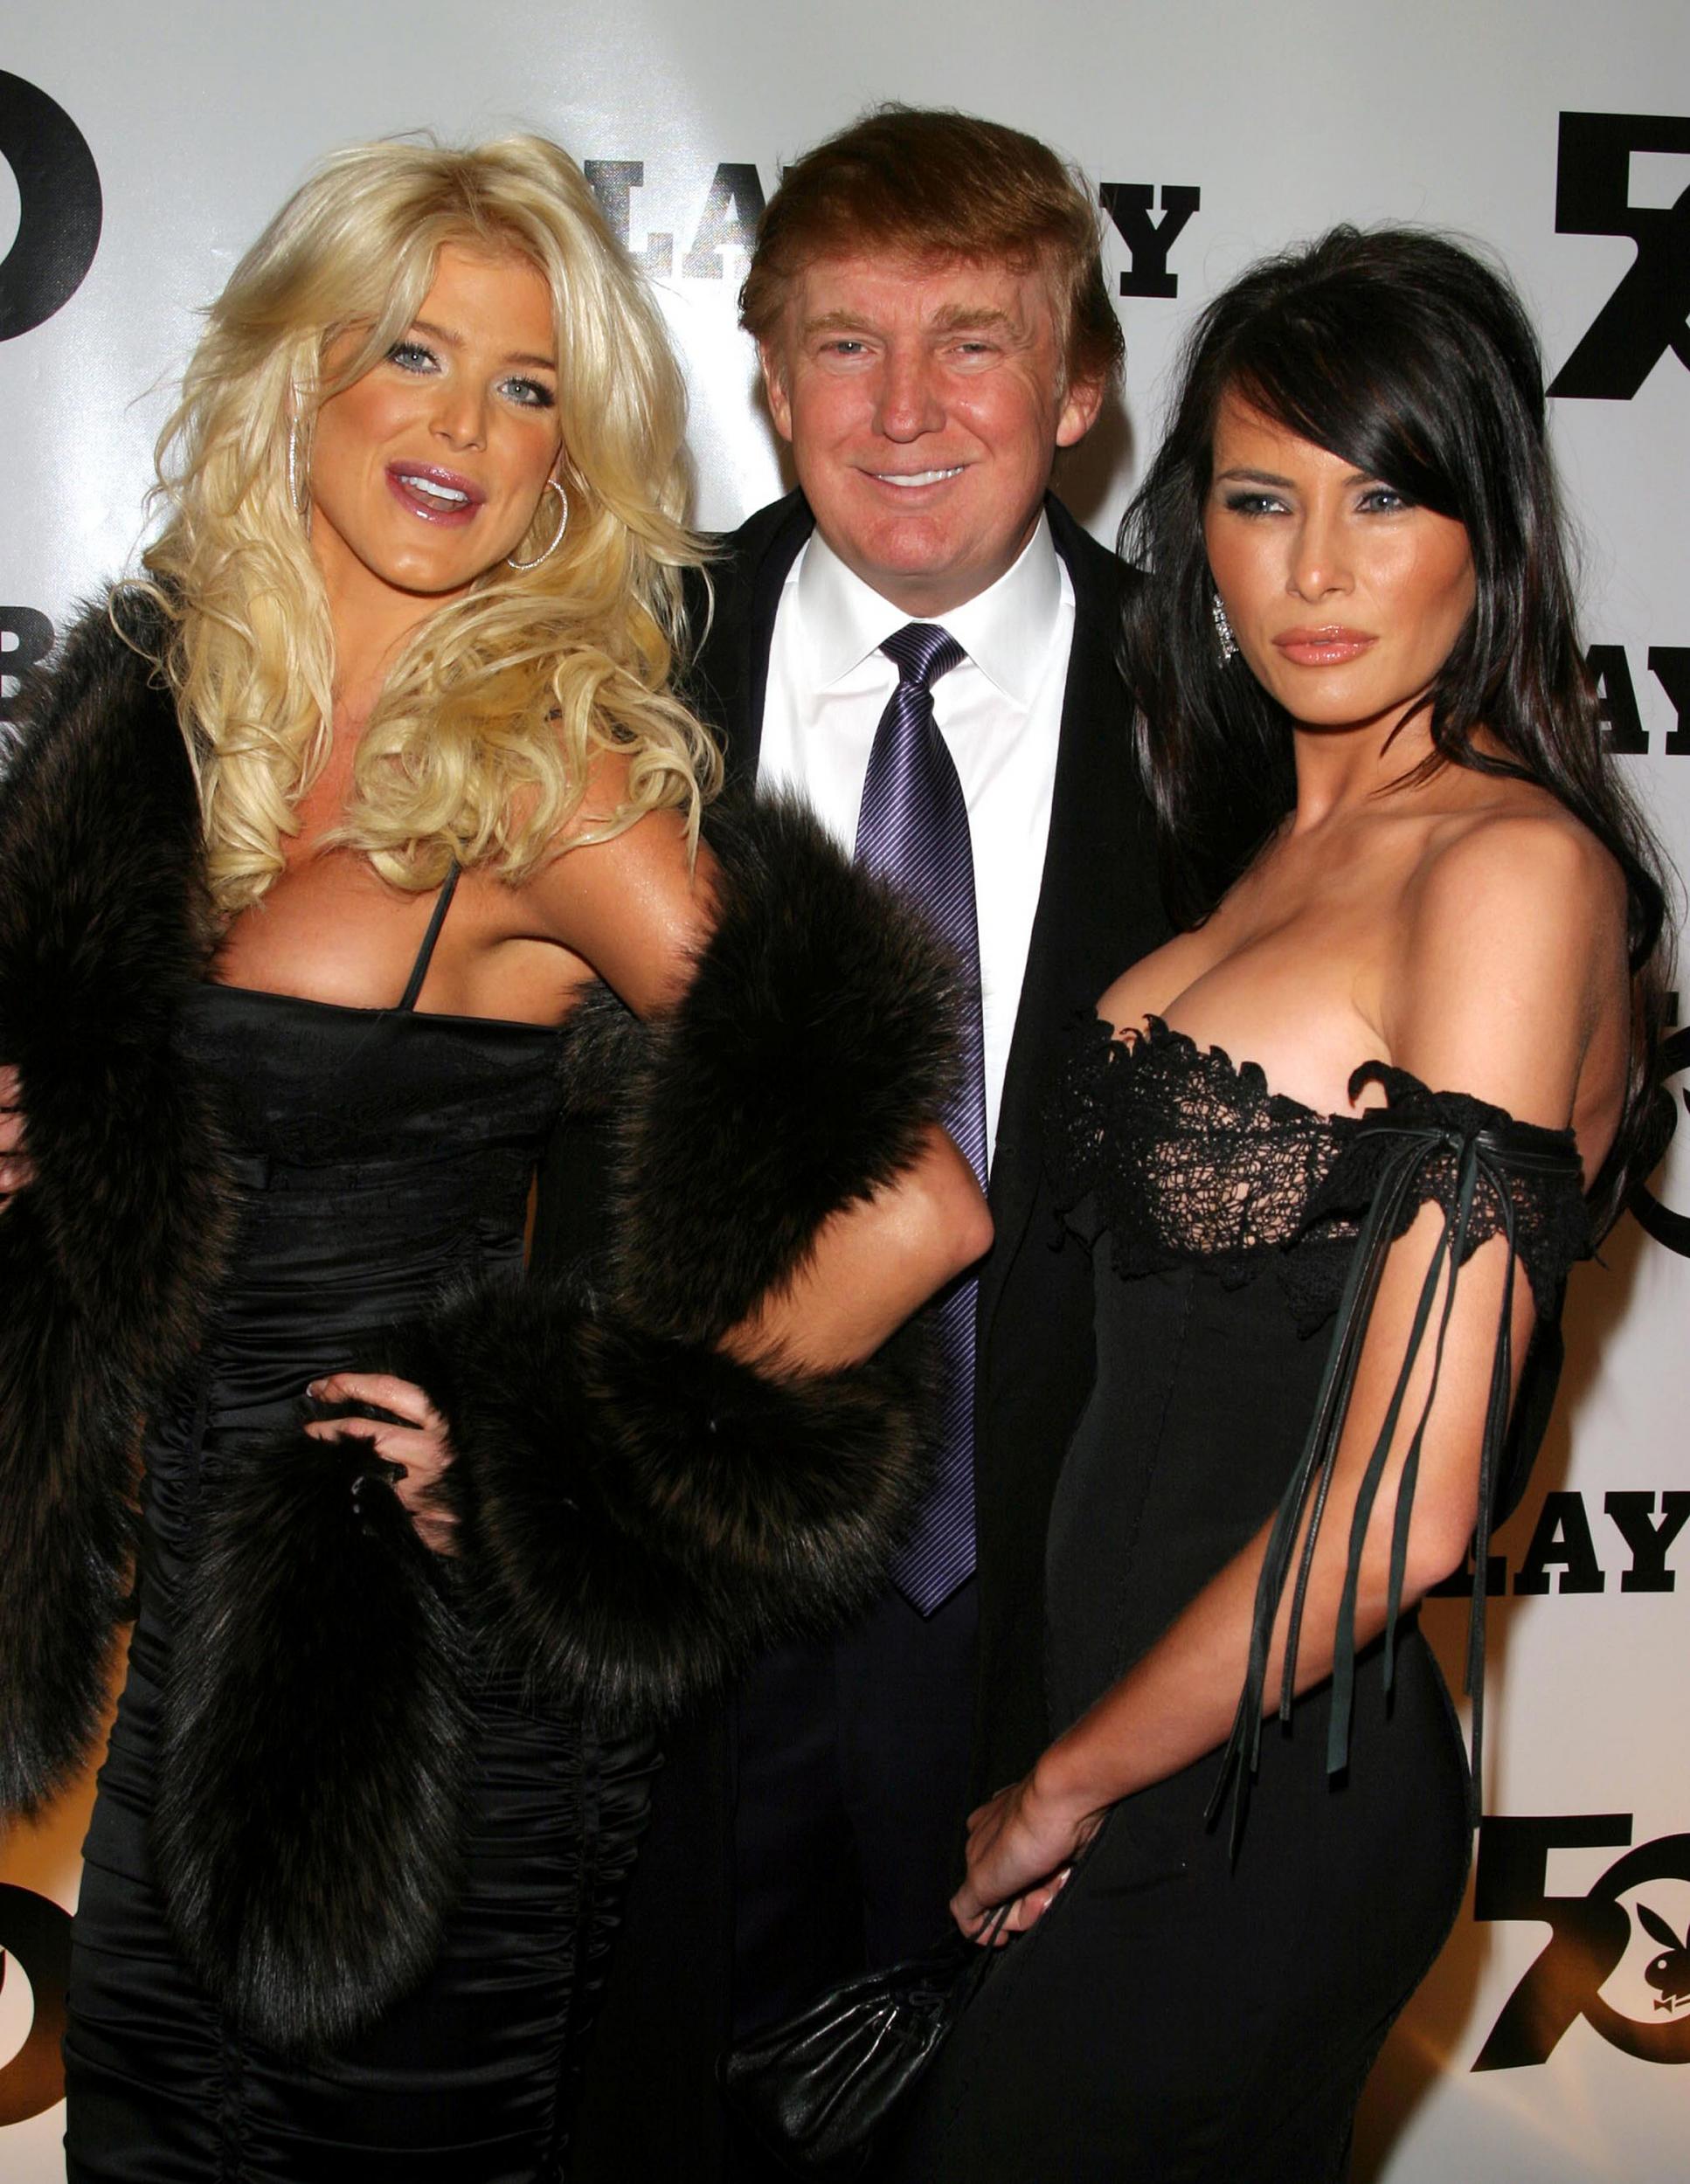 Playmate Victoria Silvstedt, Donald Trump and Melania Knauss at the Playboy 50th Anniversary celebration December 4, 2003